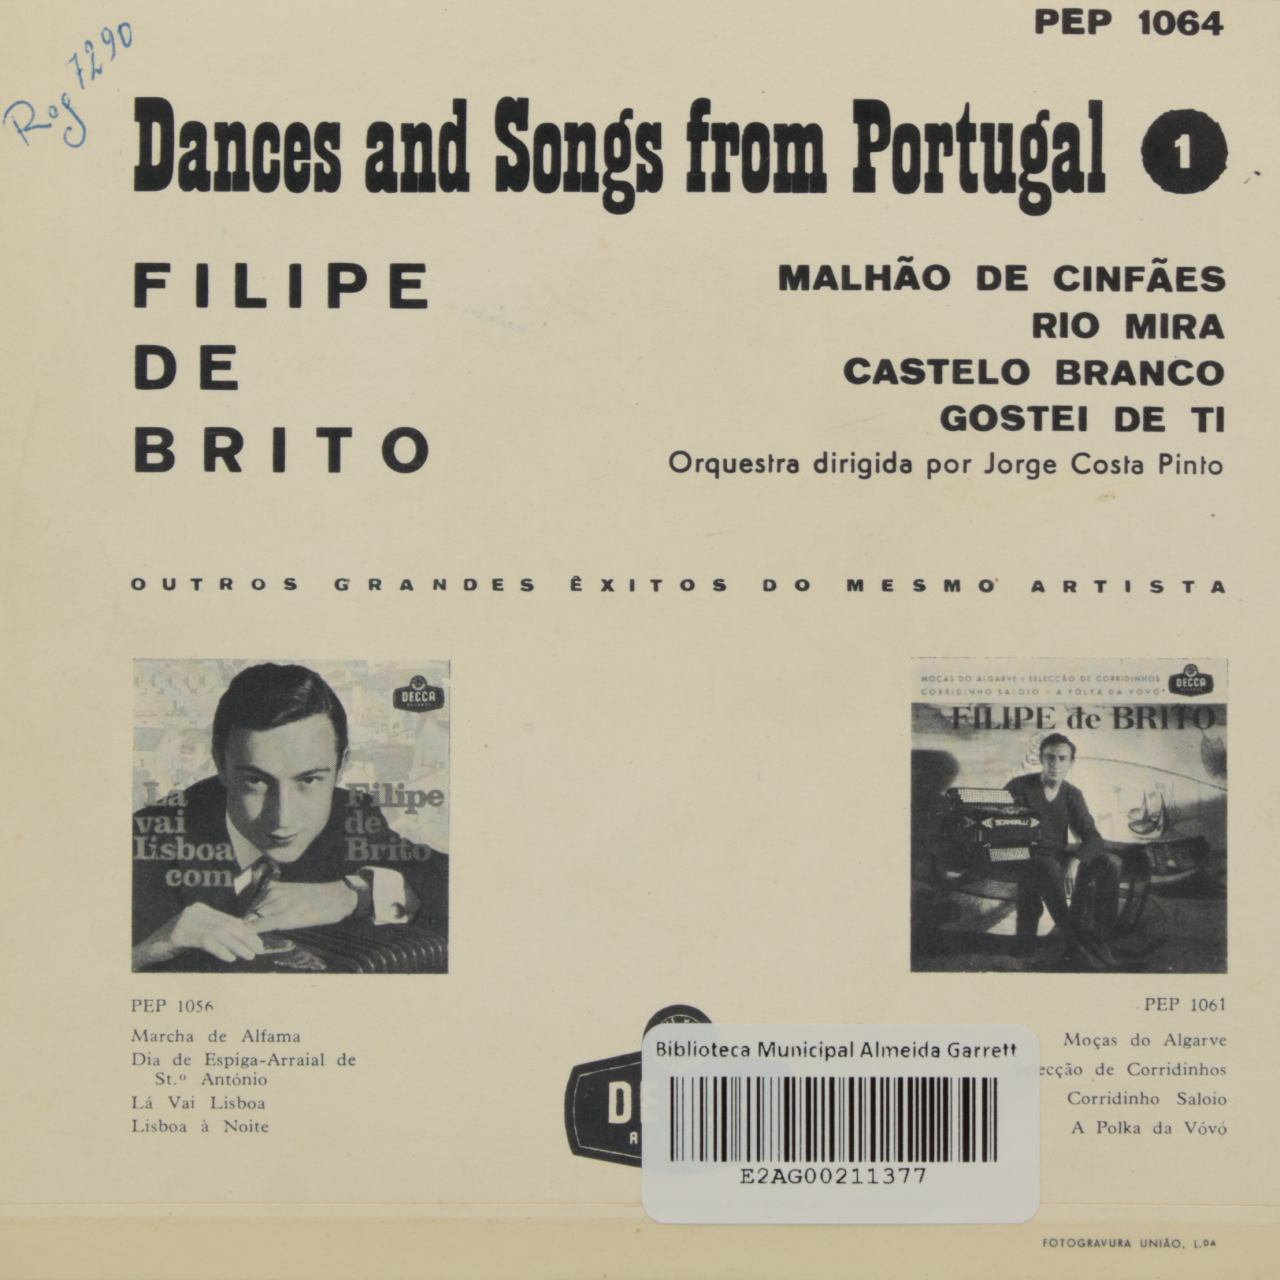 Dances and Songs from Portugal 1